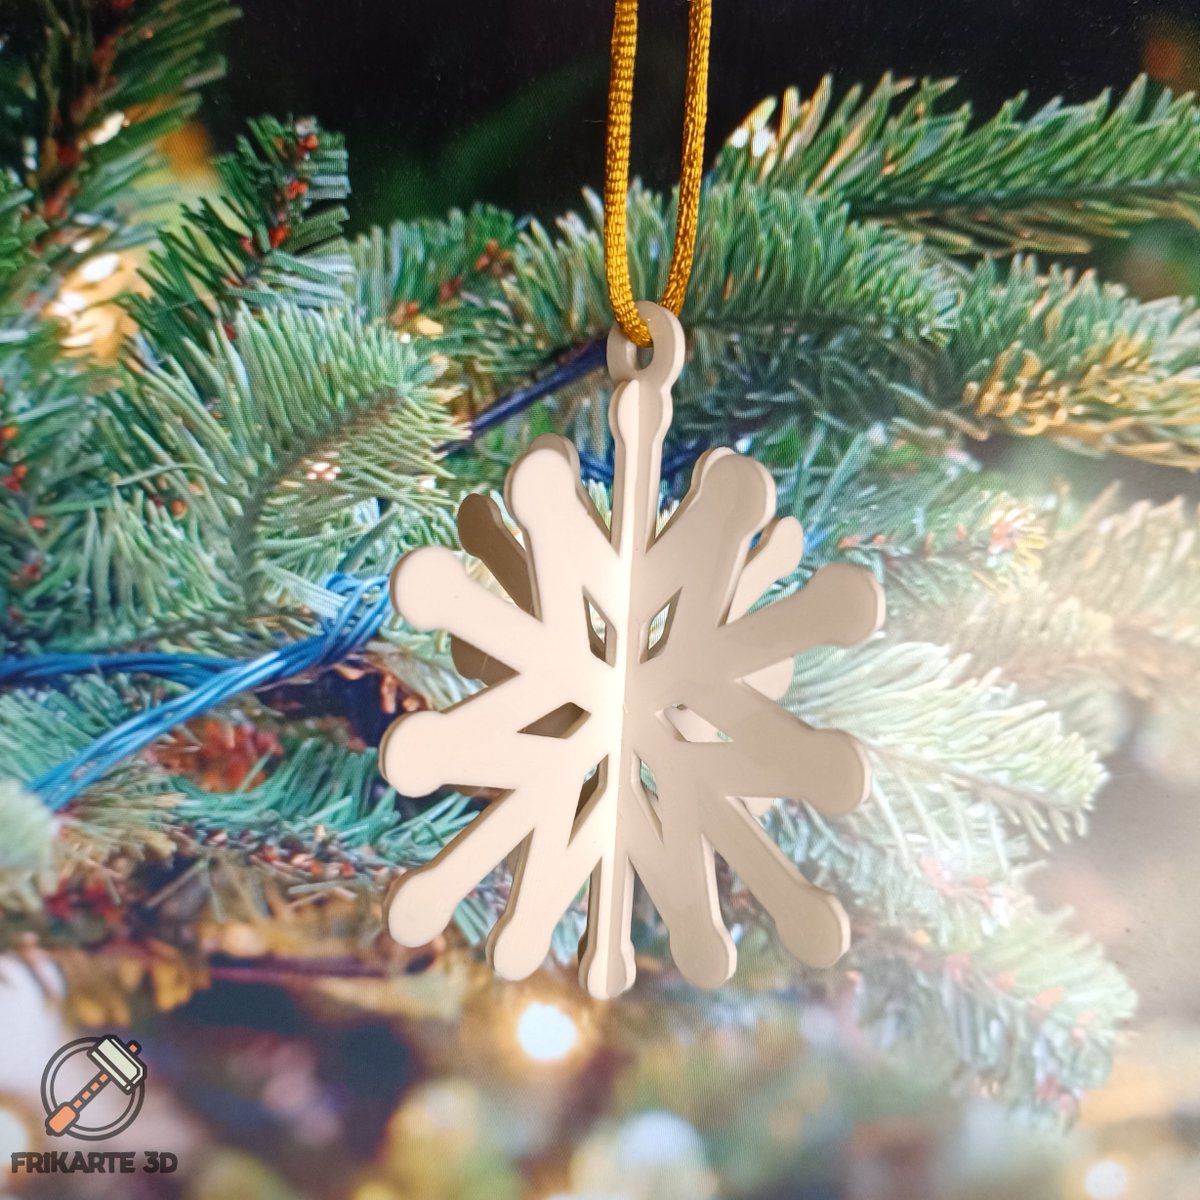 Spruce up your holiday decor with our 3D printable Ice Crystal Christmas Ornament! 🎄❄
A detailed, realistic design fit for any experience level. Add unique charm to your Christmas tree. Get yours now! 👉🏻than.gs/m/972968 #3dprinting #ChristmasOrnament @Thangs3D